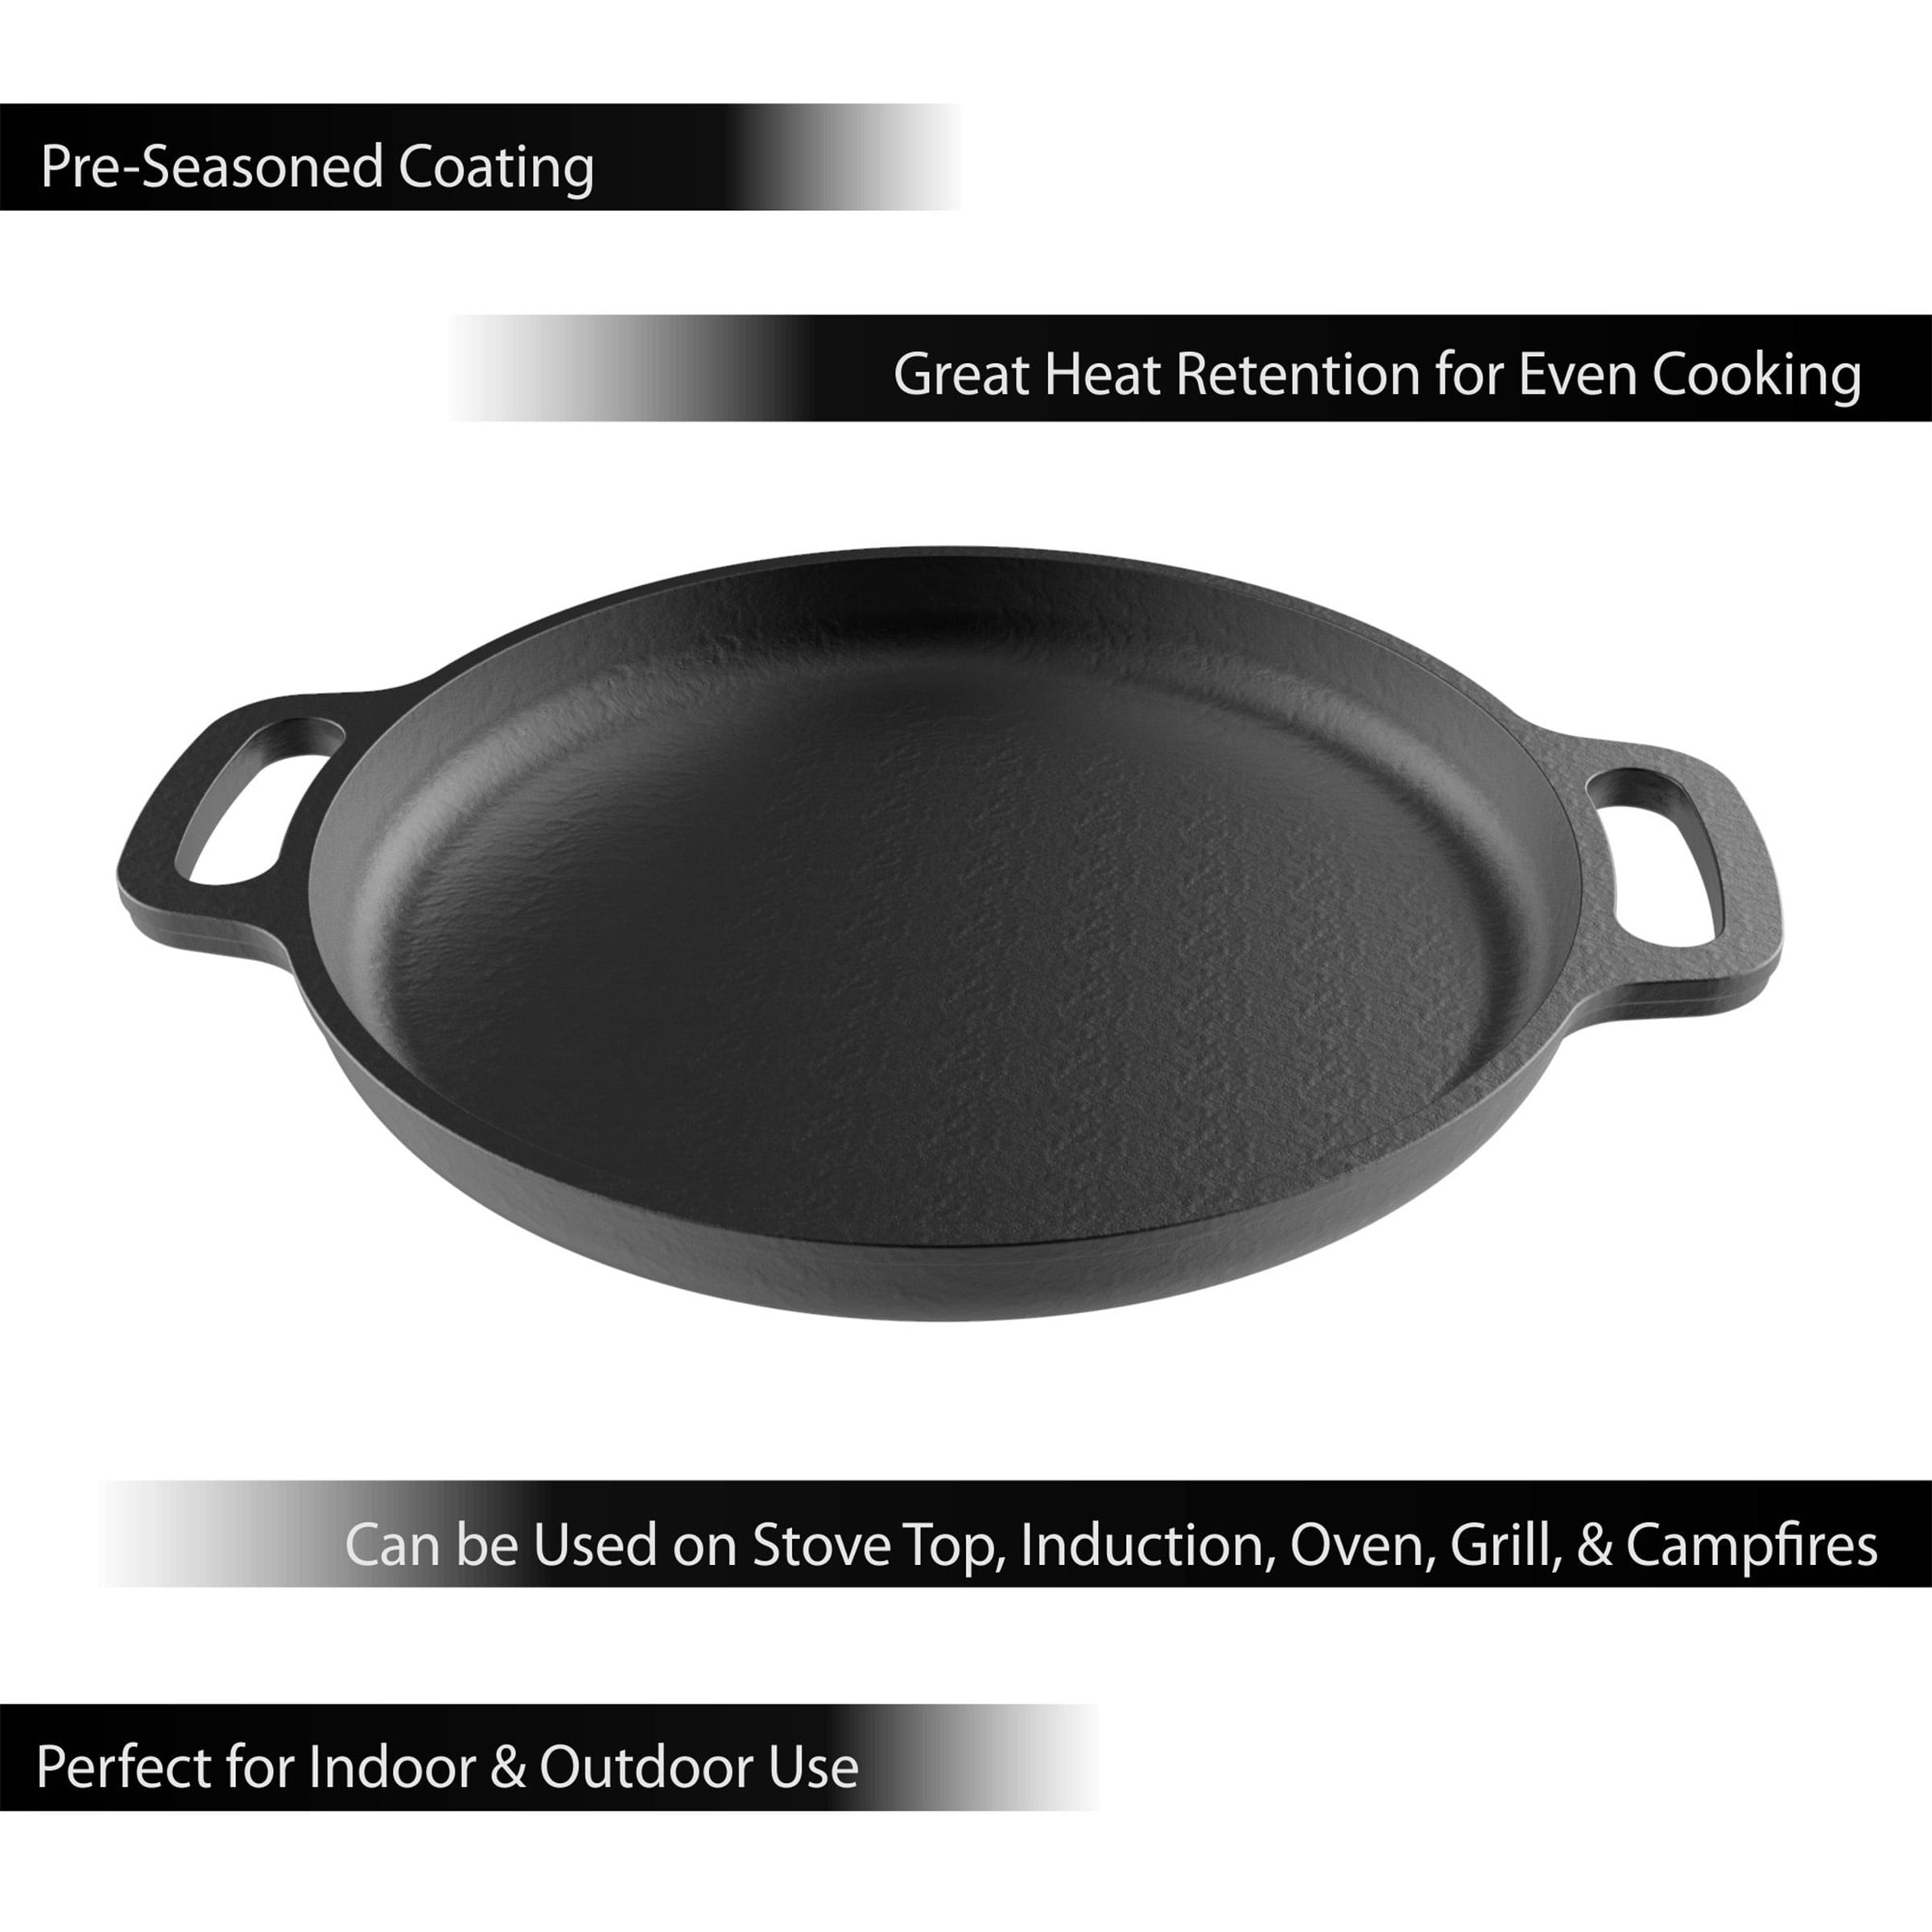 Generic Backcountry Iron 13.5 Inch Cast Iron Pizza Pan with Loop